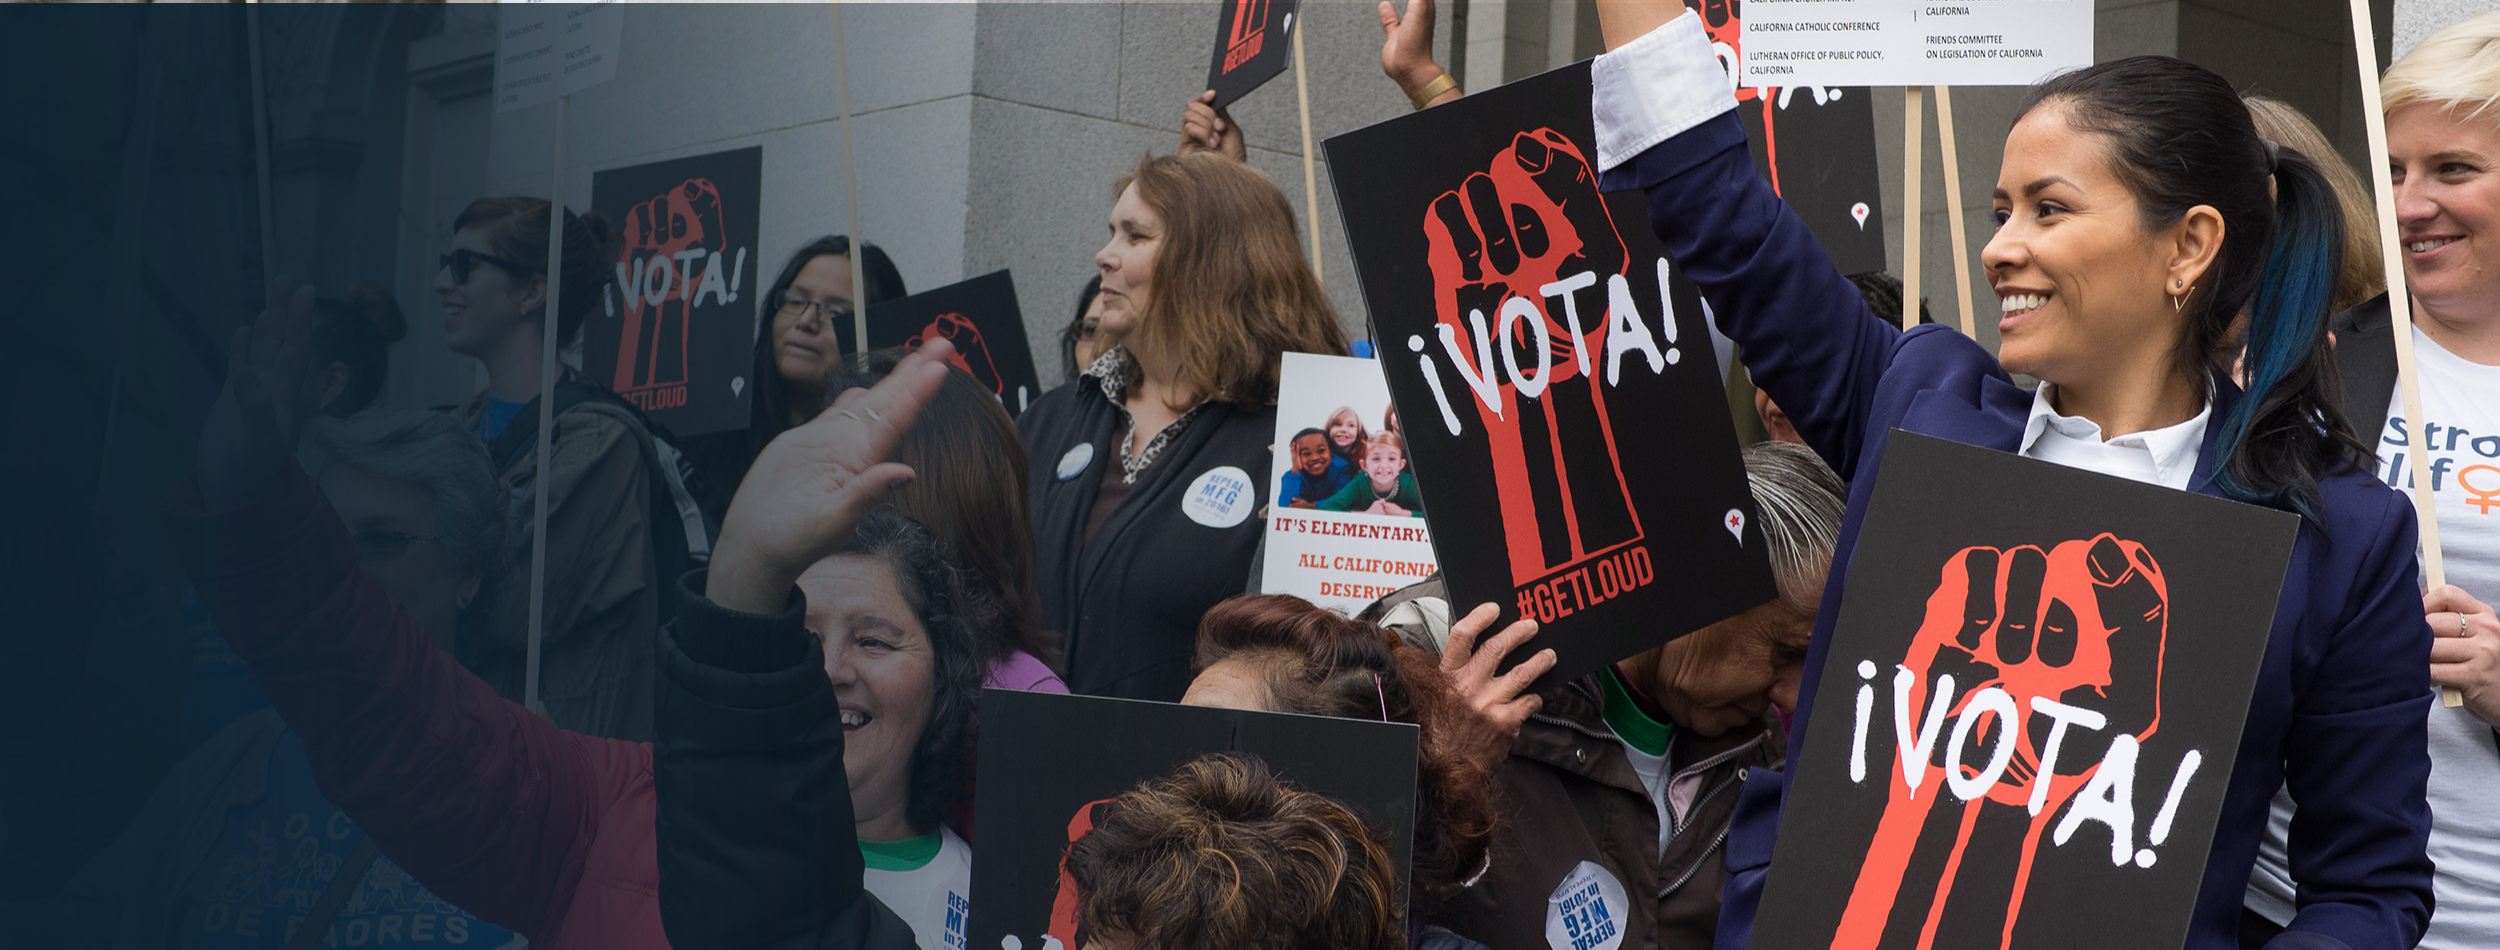 Photo shows a group of women with protest signs that say Vota! with illustrated red power fists on them. The diverse group of women are cheering together.